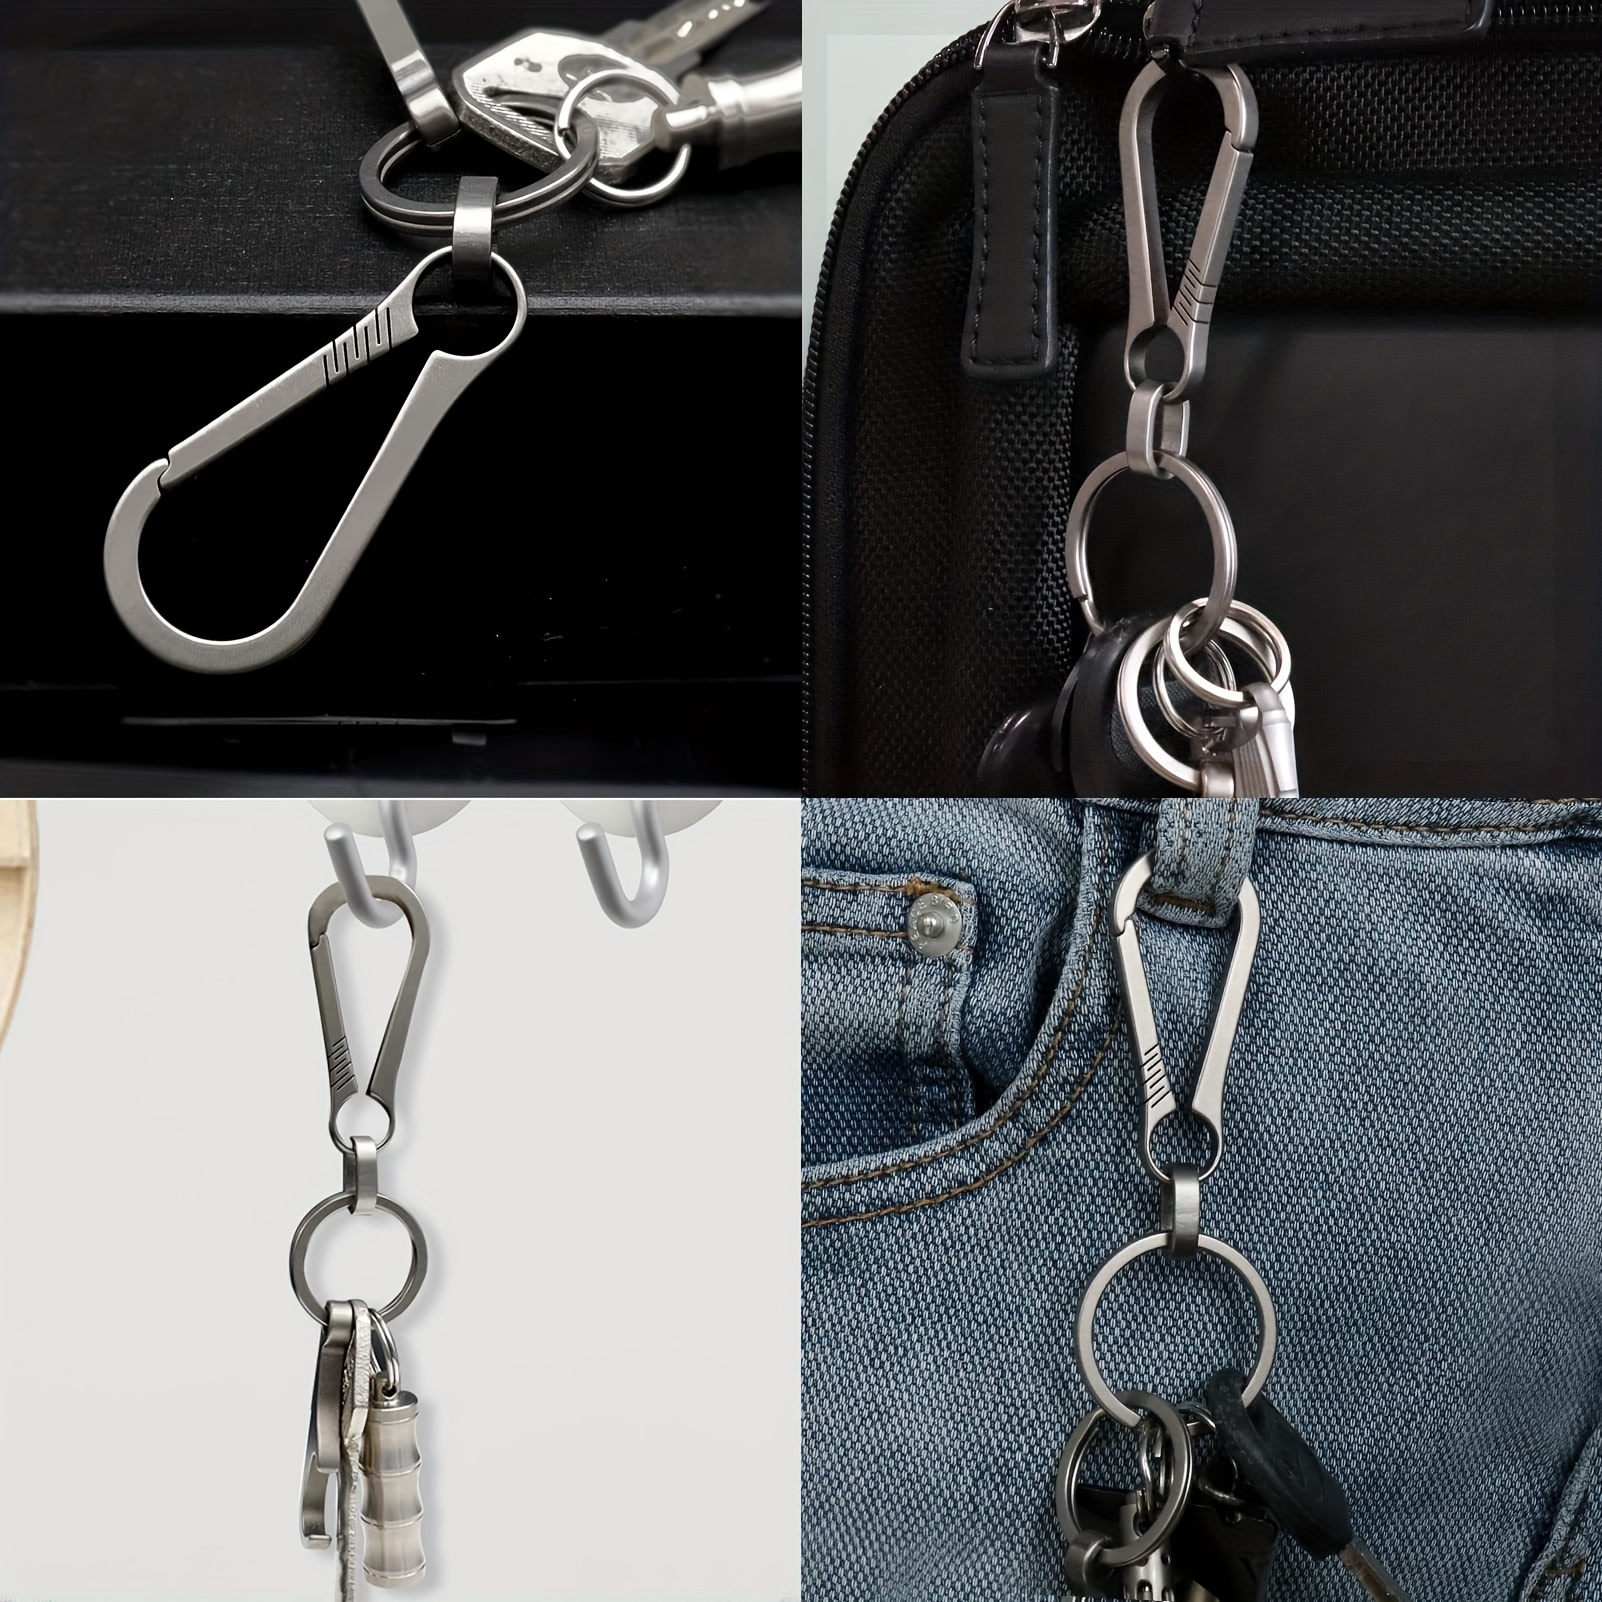 Titanium Keychain Quick Release Key Chain Clip With 1 Key Ring Small  Carabiner Key Chain Clip Edc Quick Release Hooks The Wonderful Gift For Men  And Women, Shop The Latest Trends